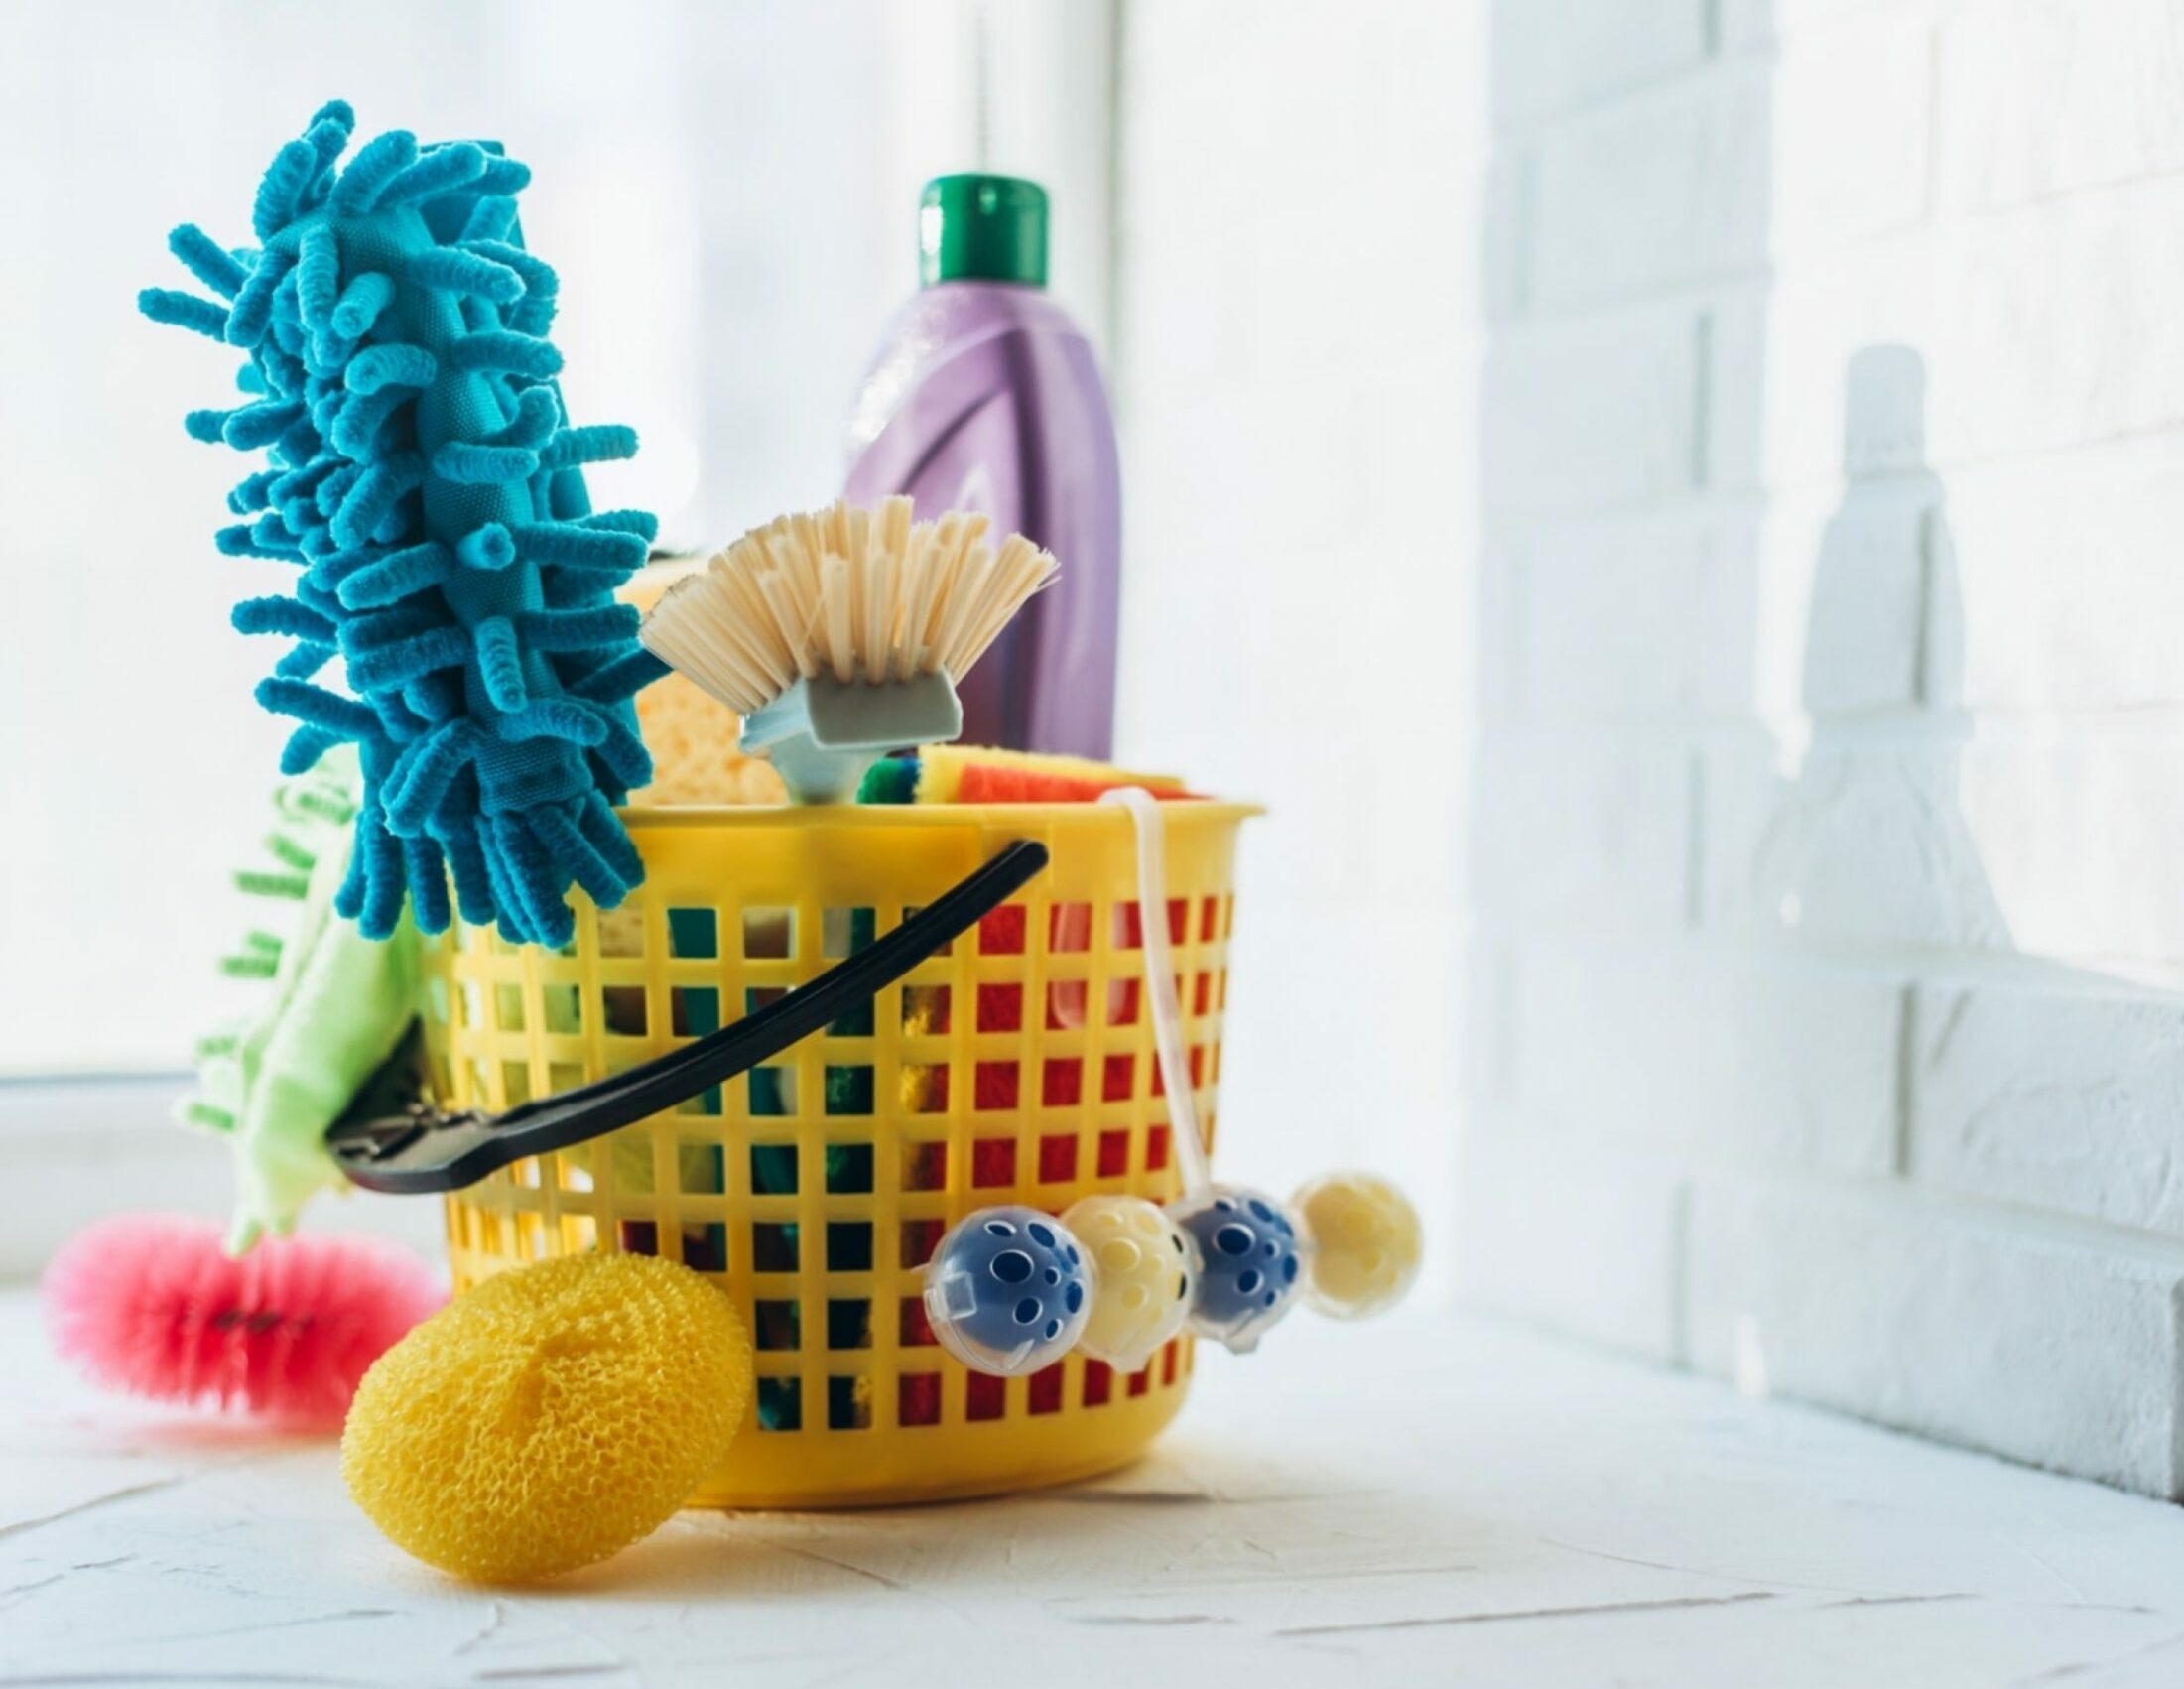 20 Cleaning Products to Keep in Your Home - Cleanzen